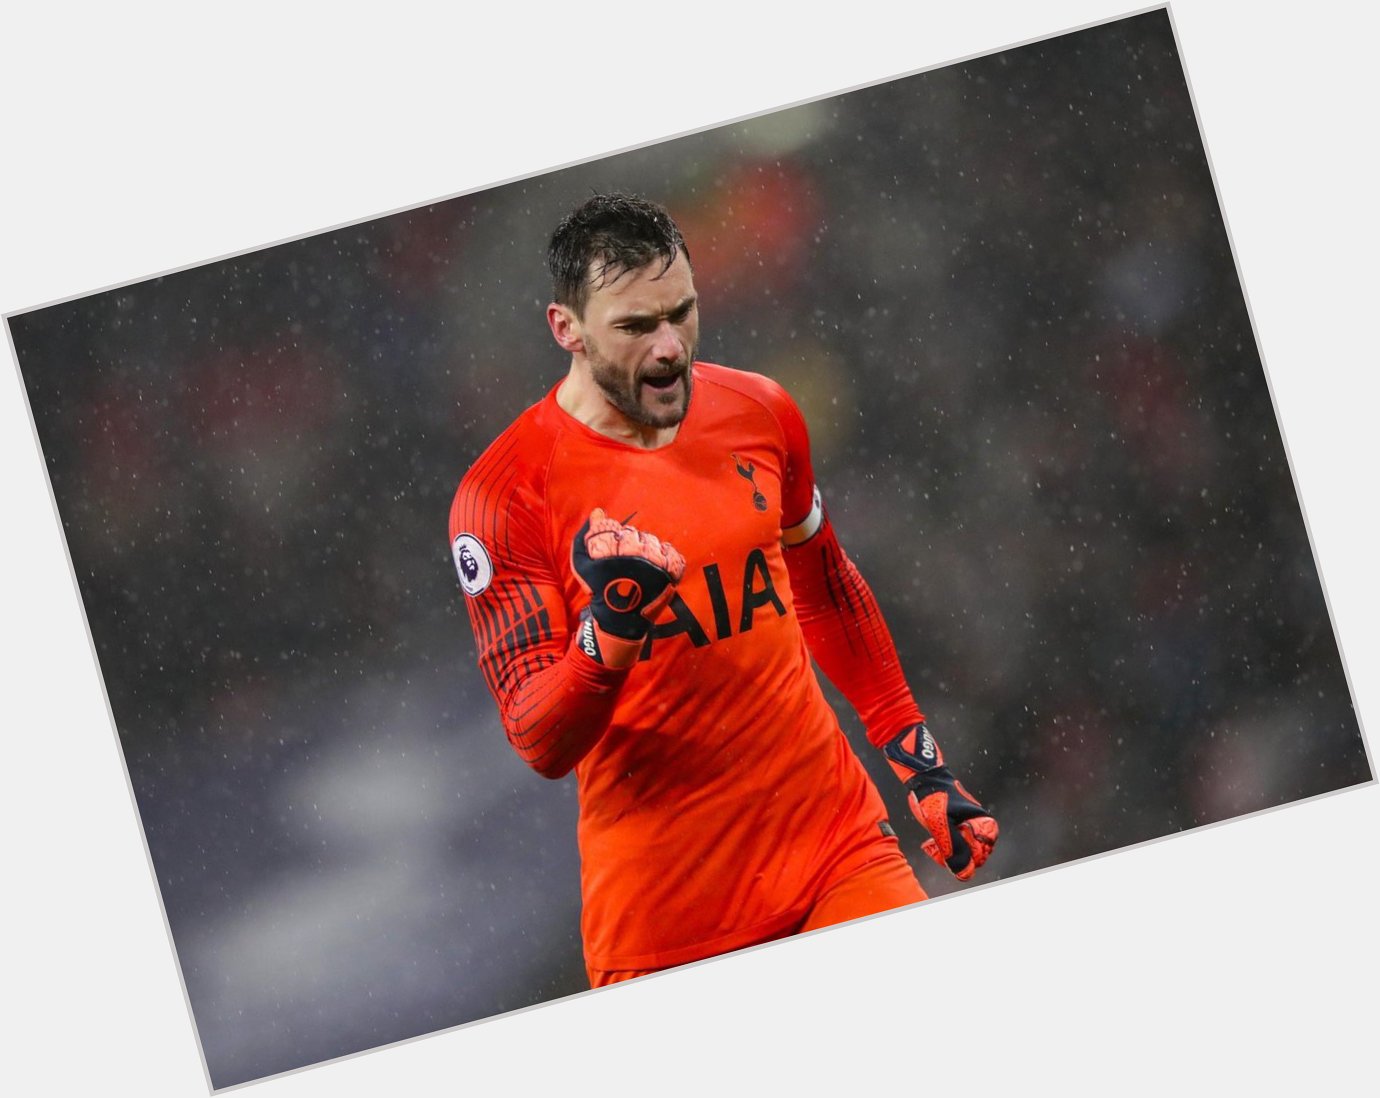 Happy Birthday to the one and only! To the best! HUGO LLORIS 